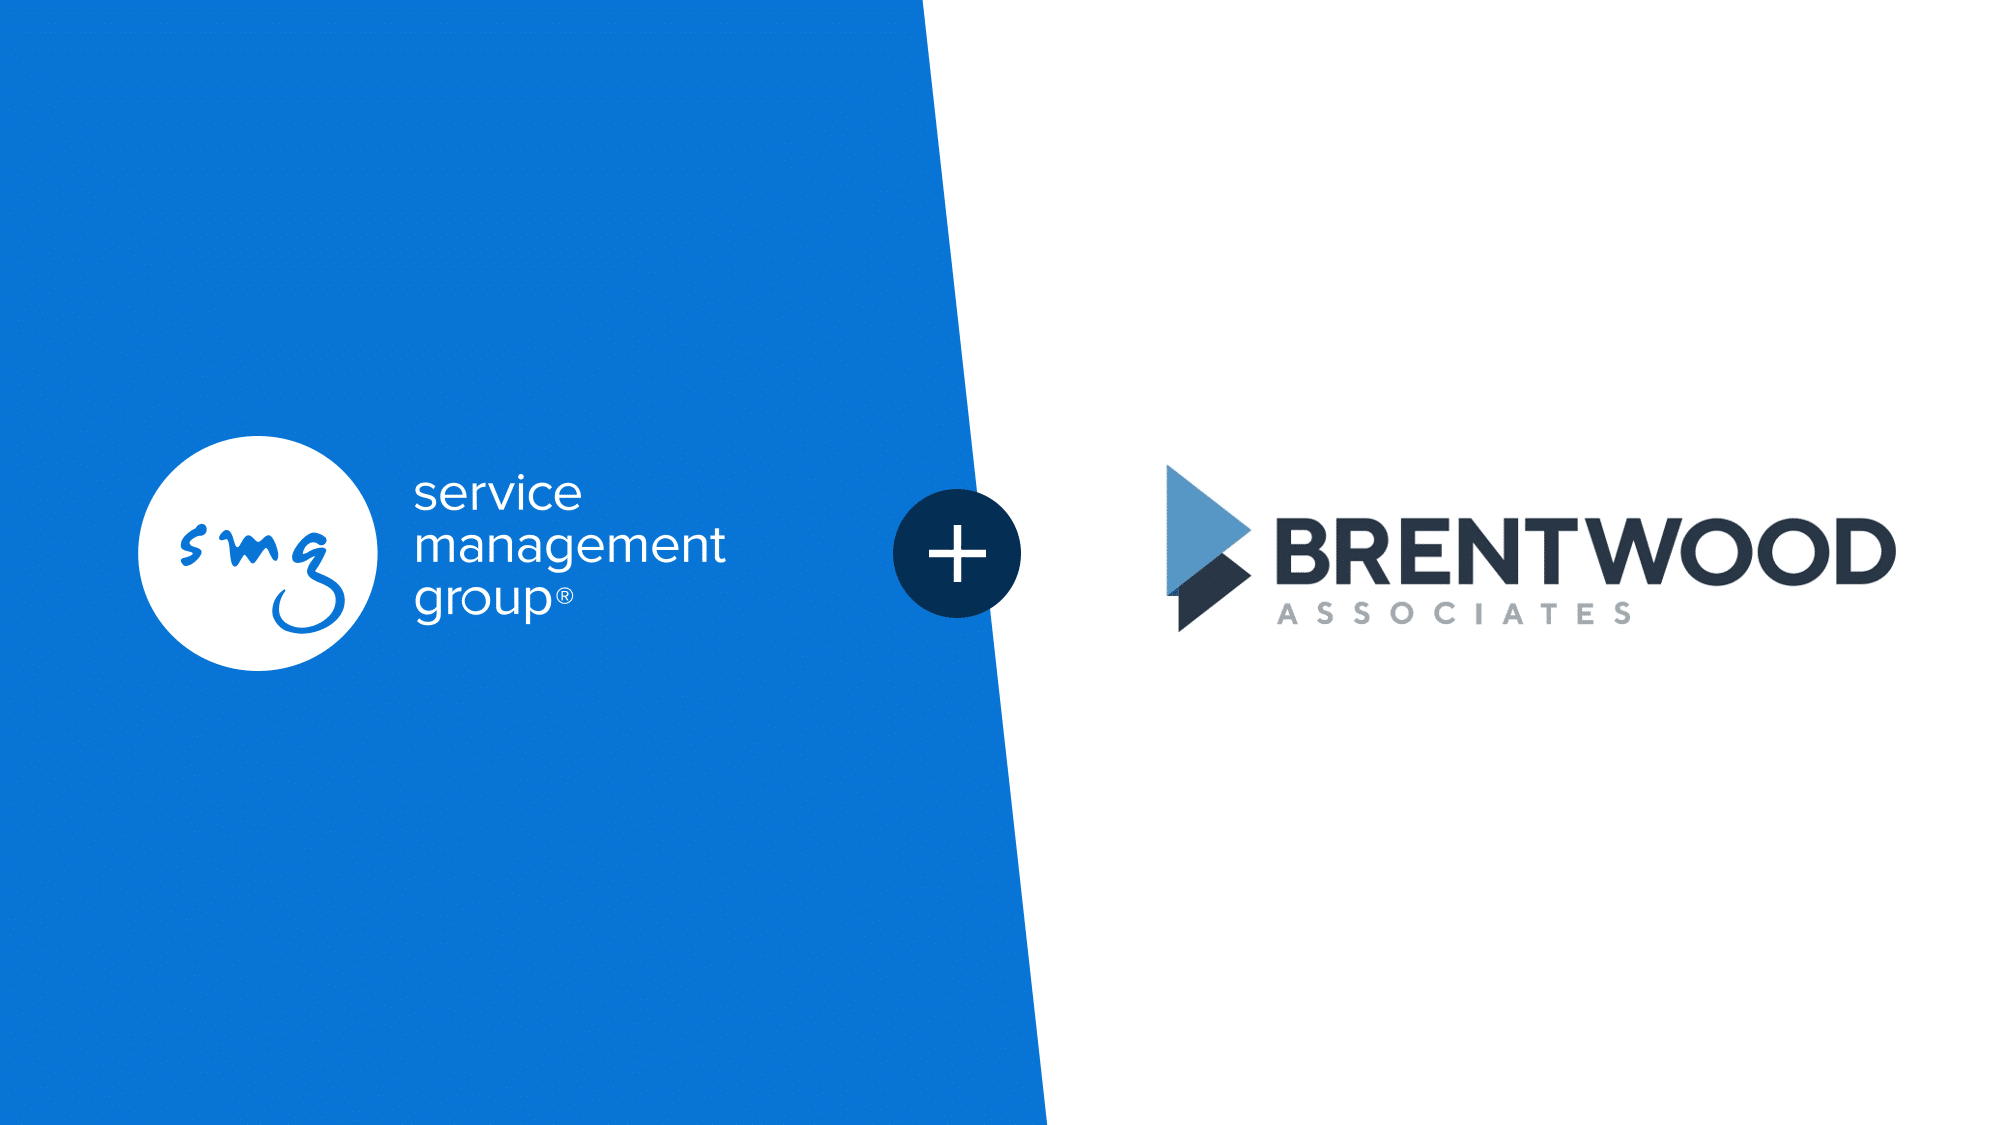 SMG receives a significant strategic investment from Brentwood Associates to accelerate innovation and increase value for clients